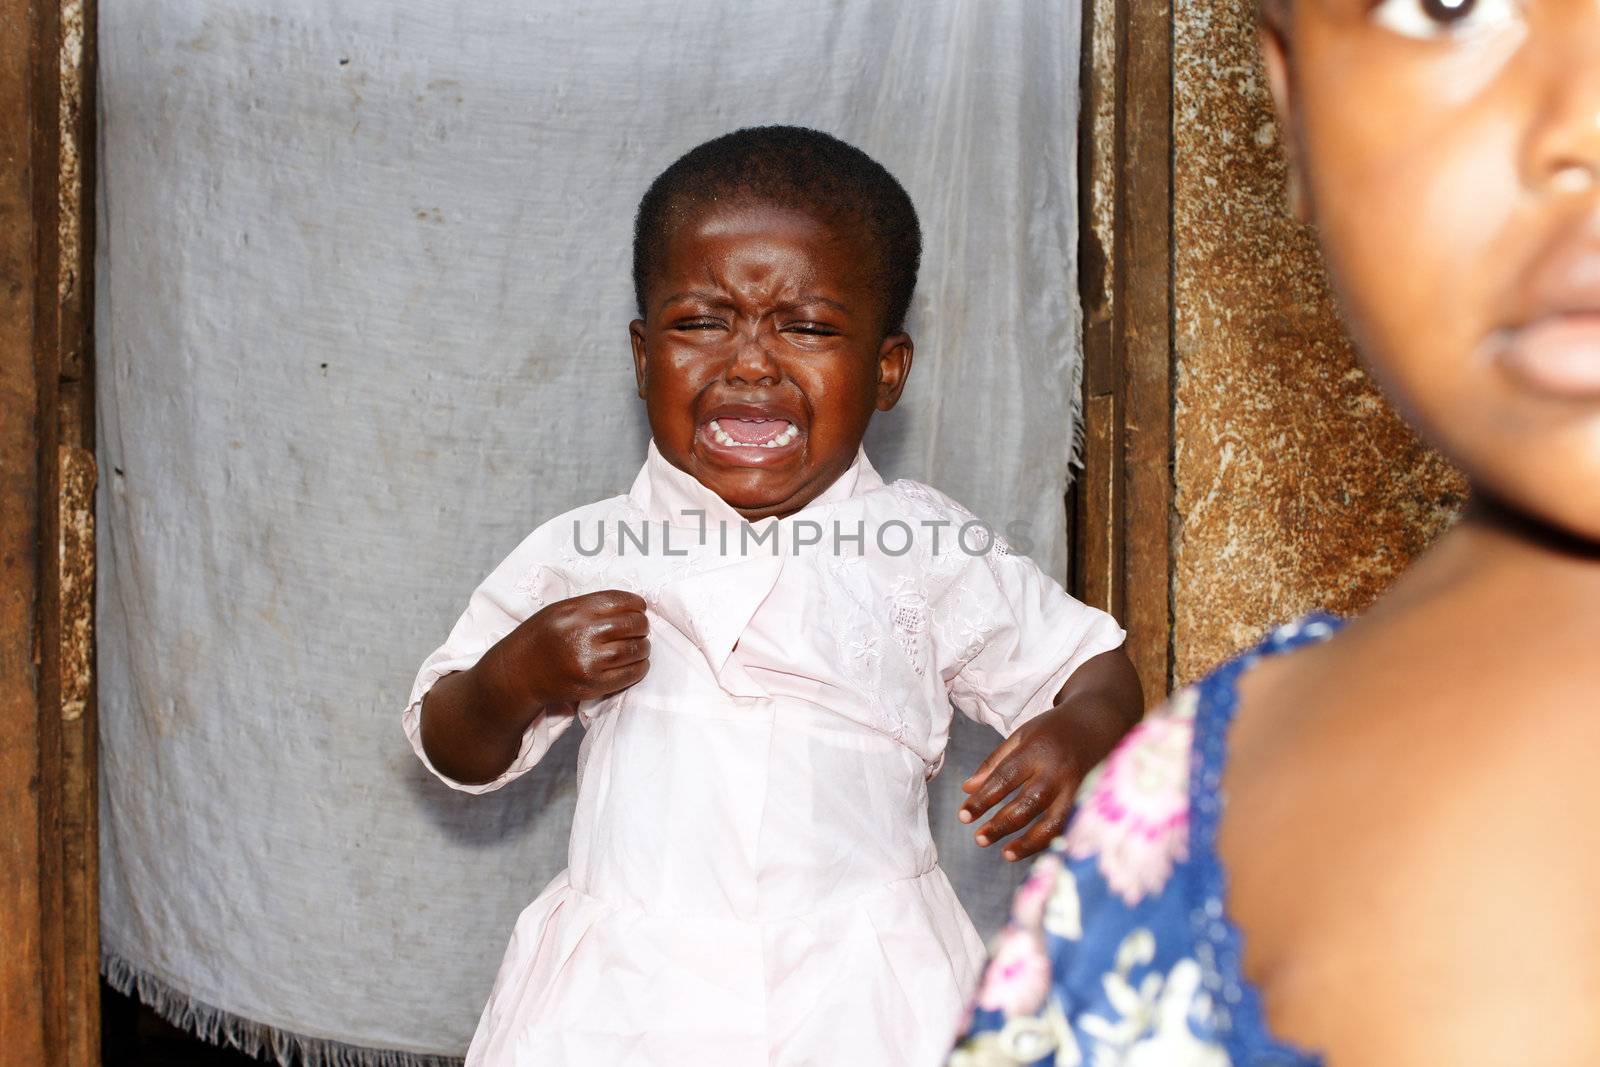 Caught on the fly: little black African baby girl, crying loudly, with bigger sister in the foreground; focus on crying toddler; candid, natural and unstaged portraits.